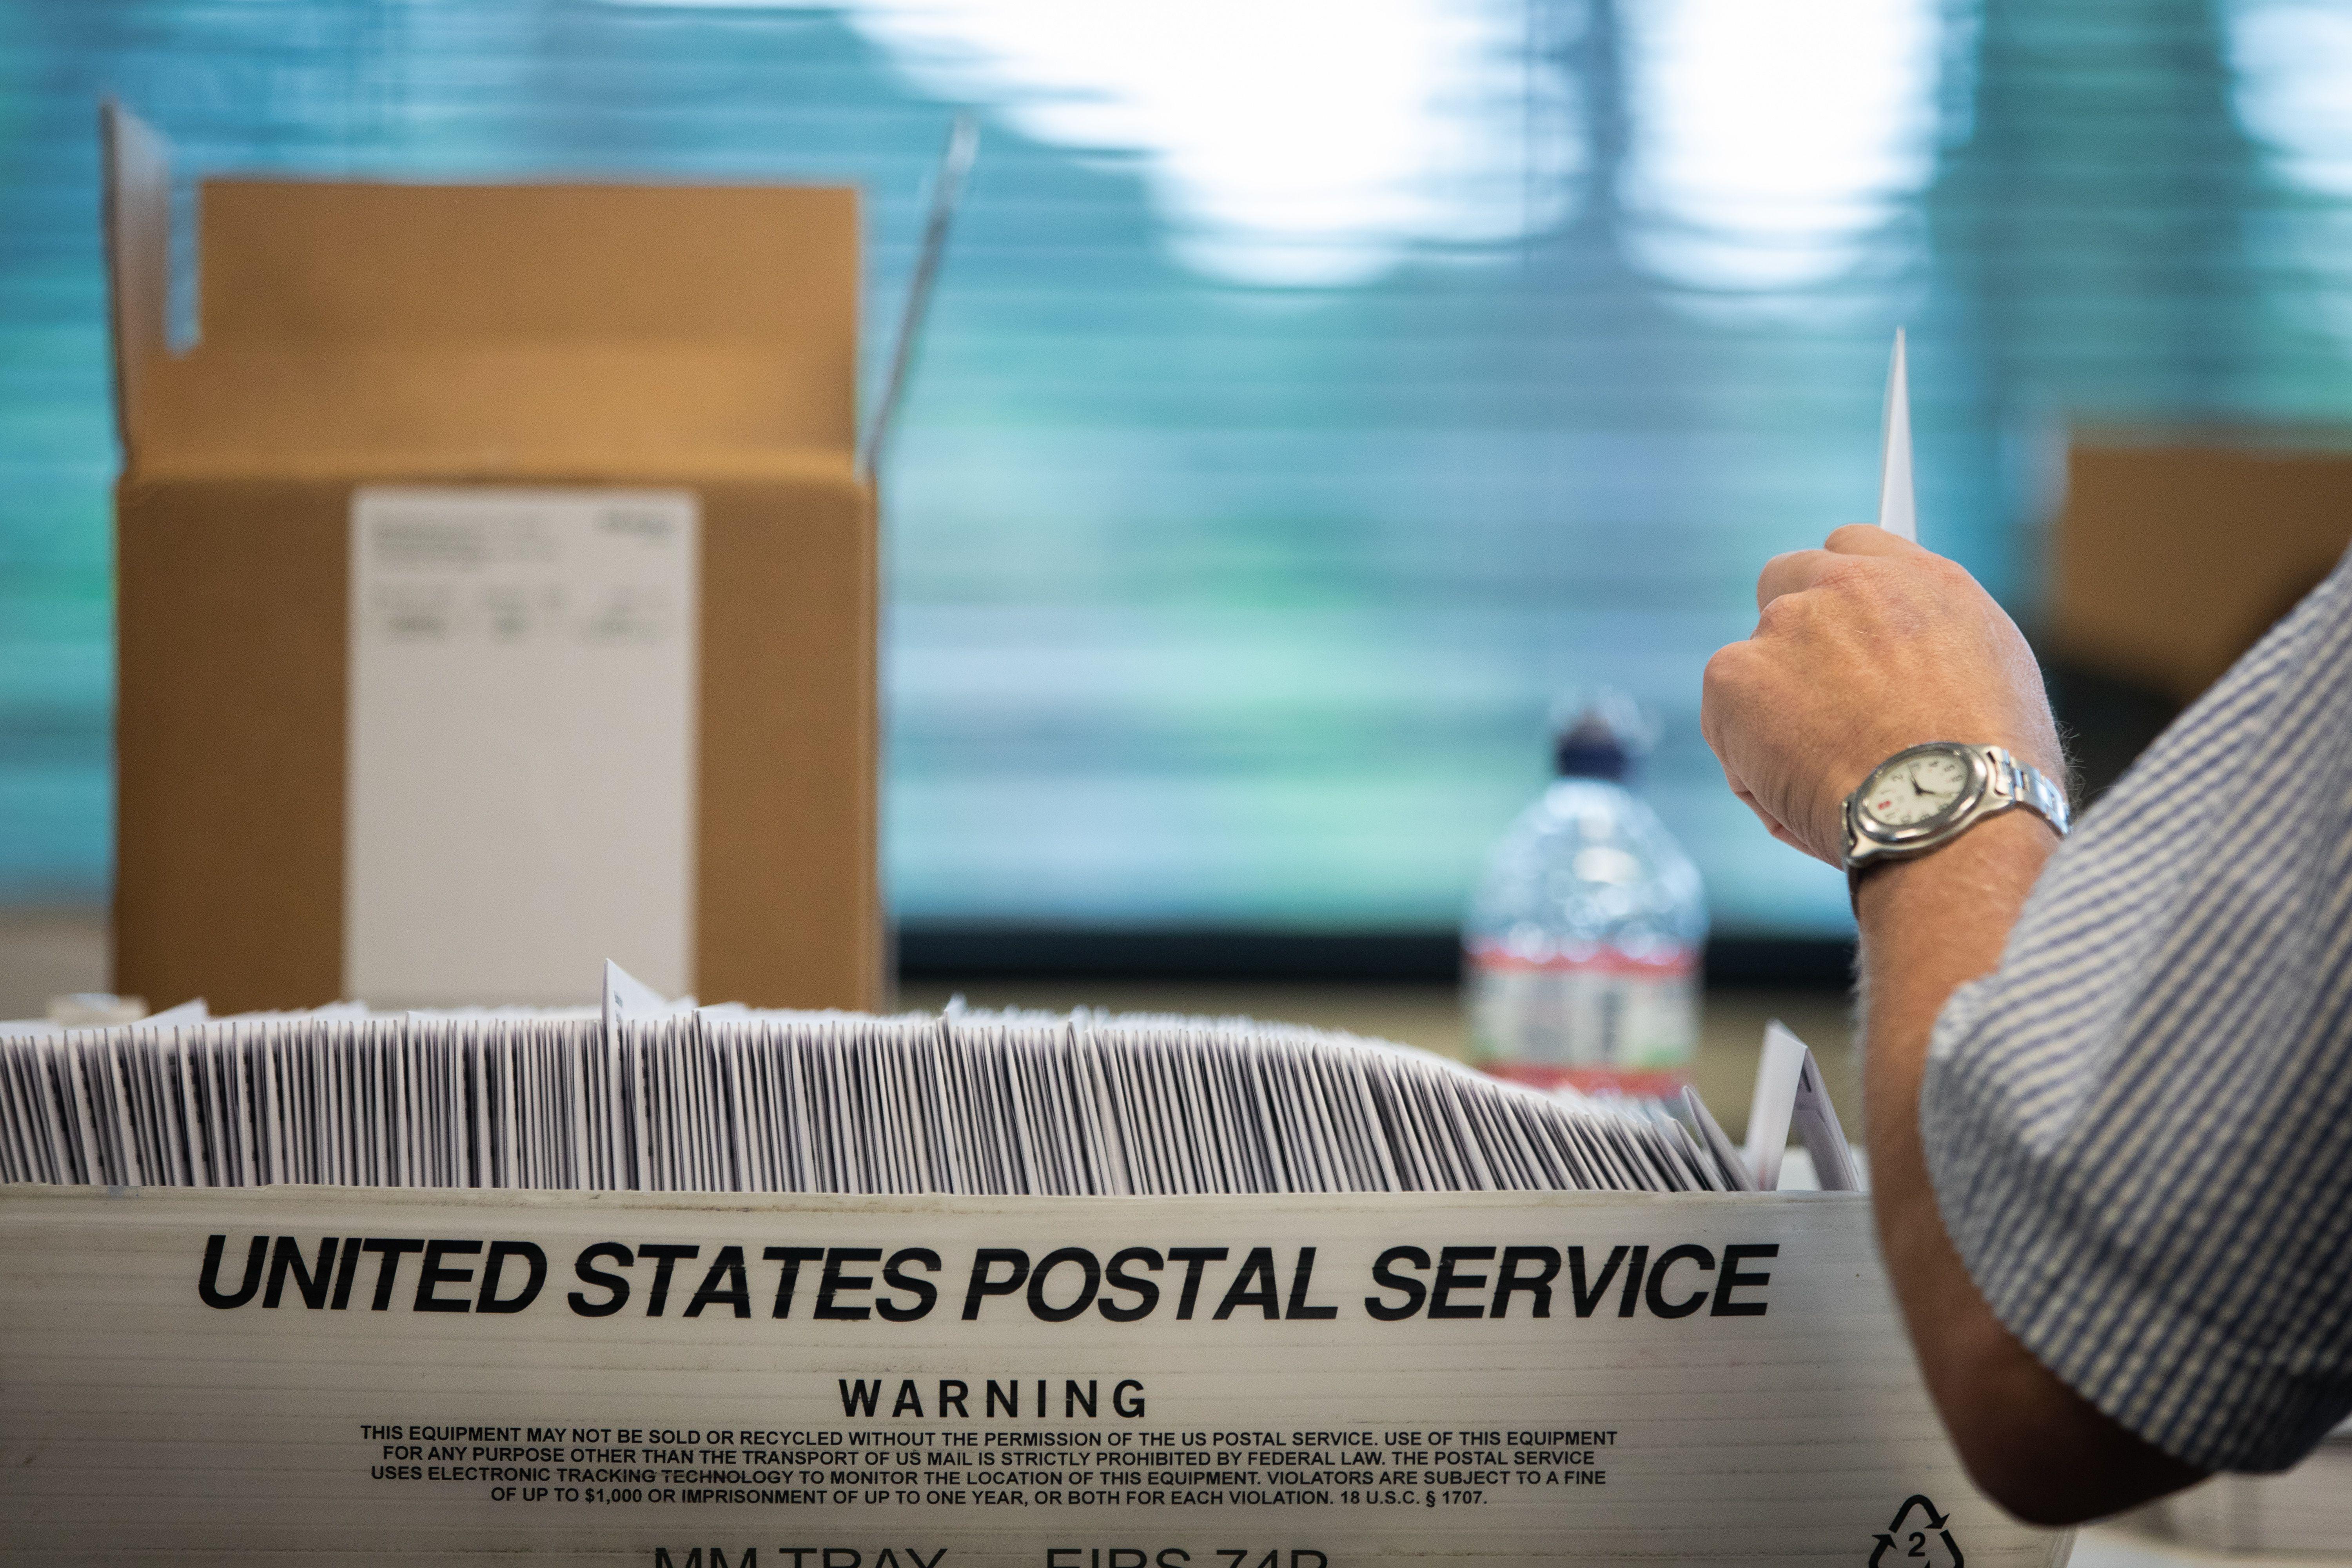 A box reading "United States Postal Service" is seen full of files. An arm is seen taking one out.